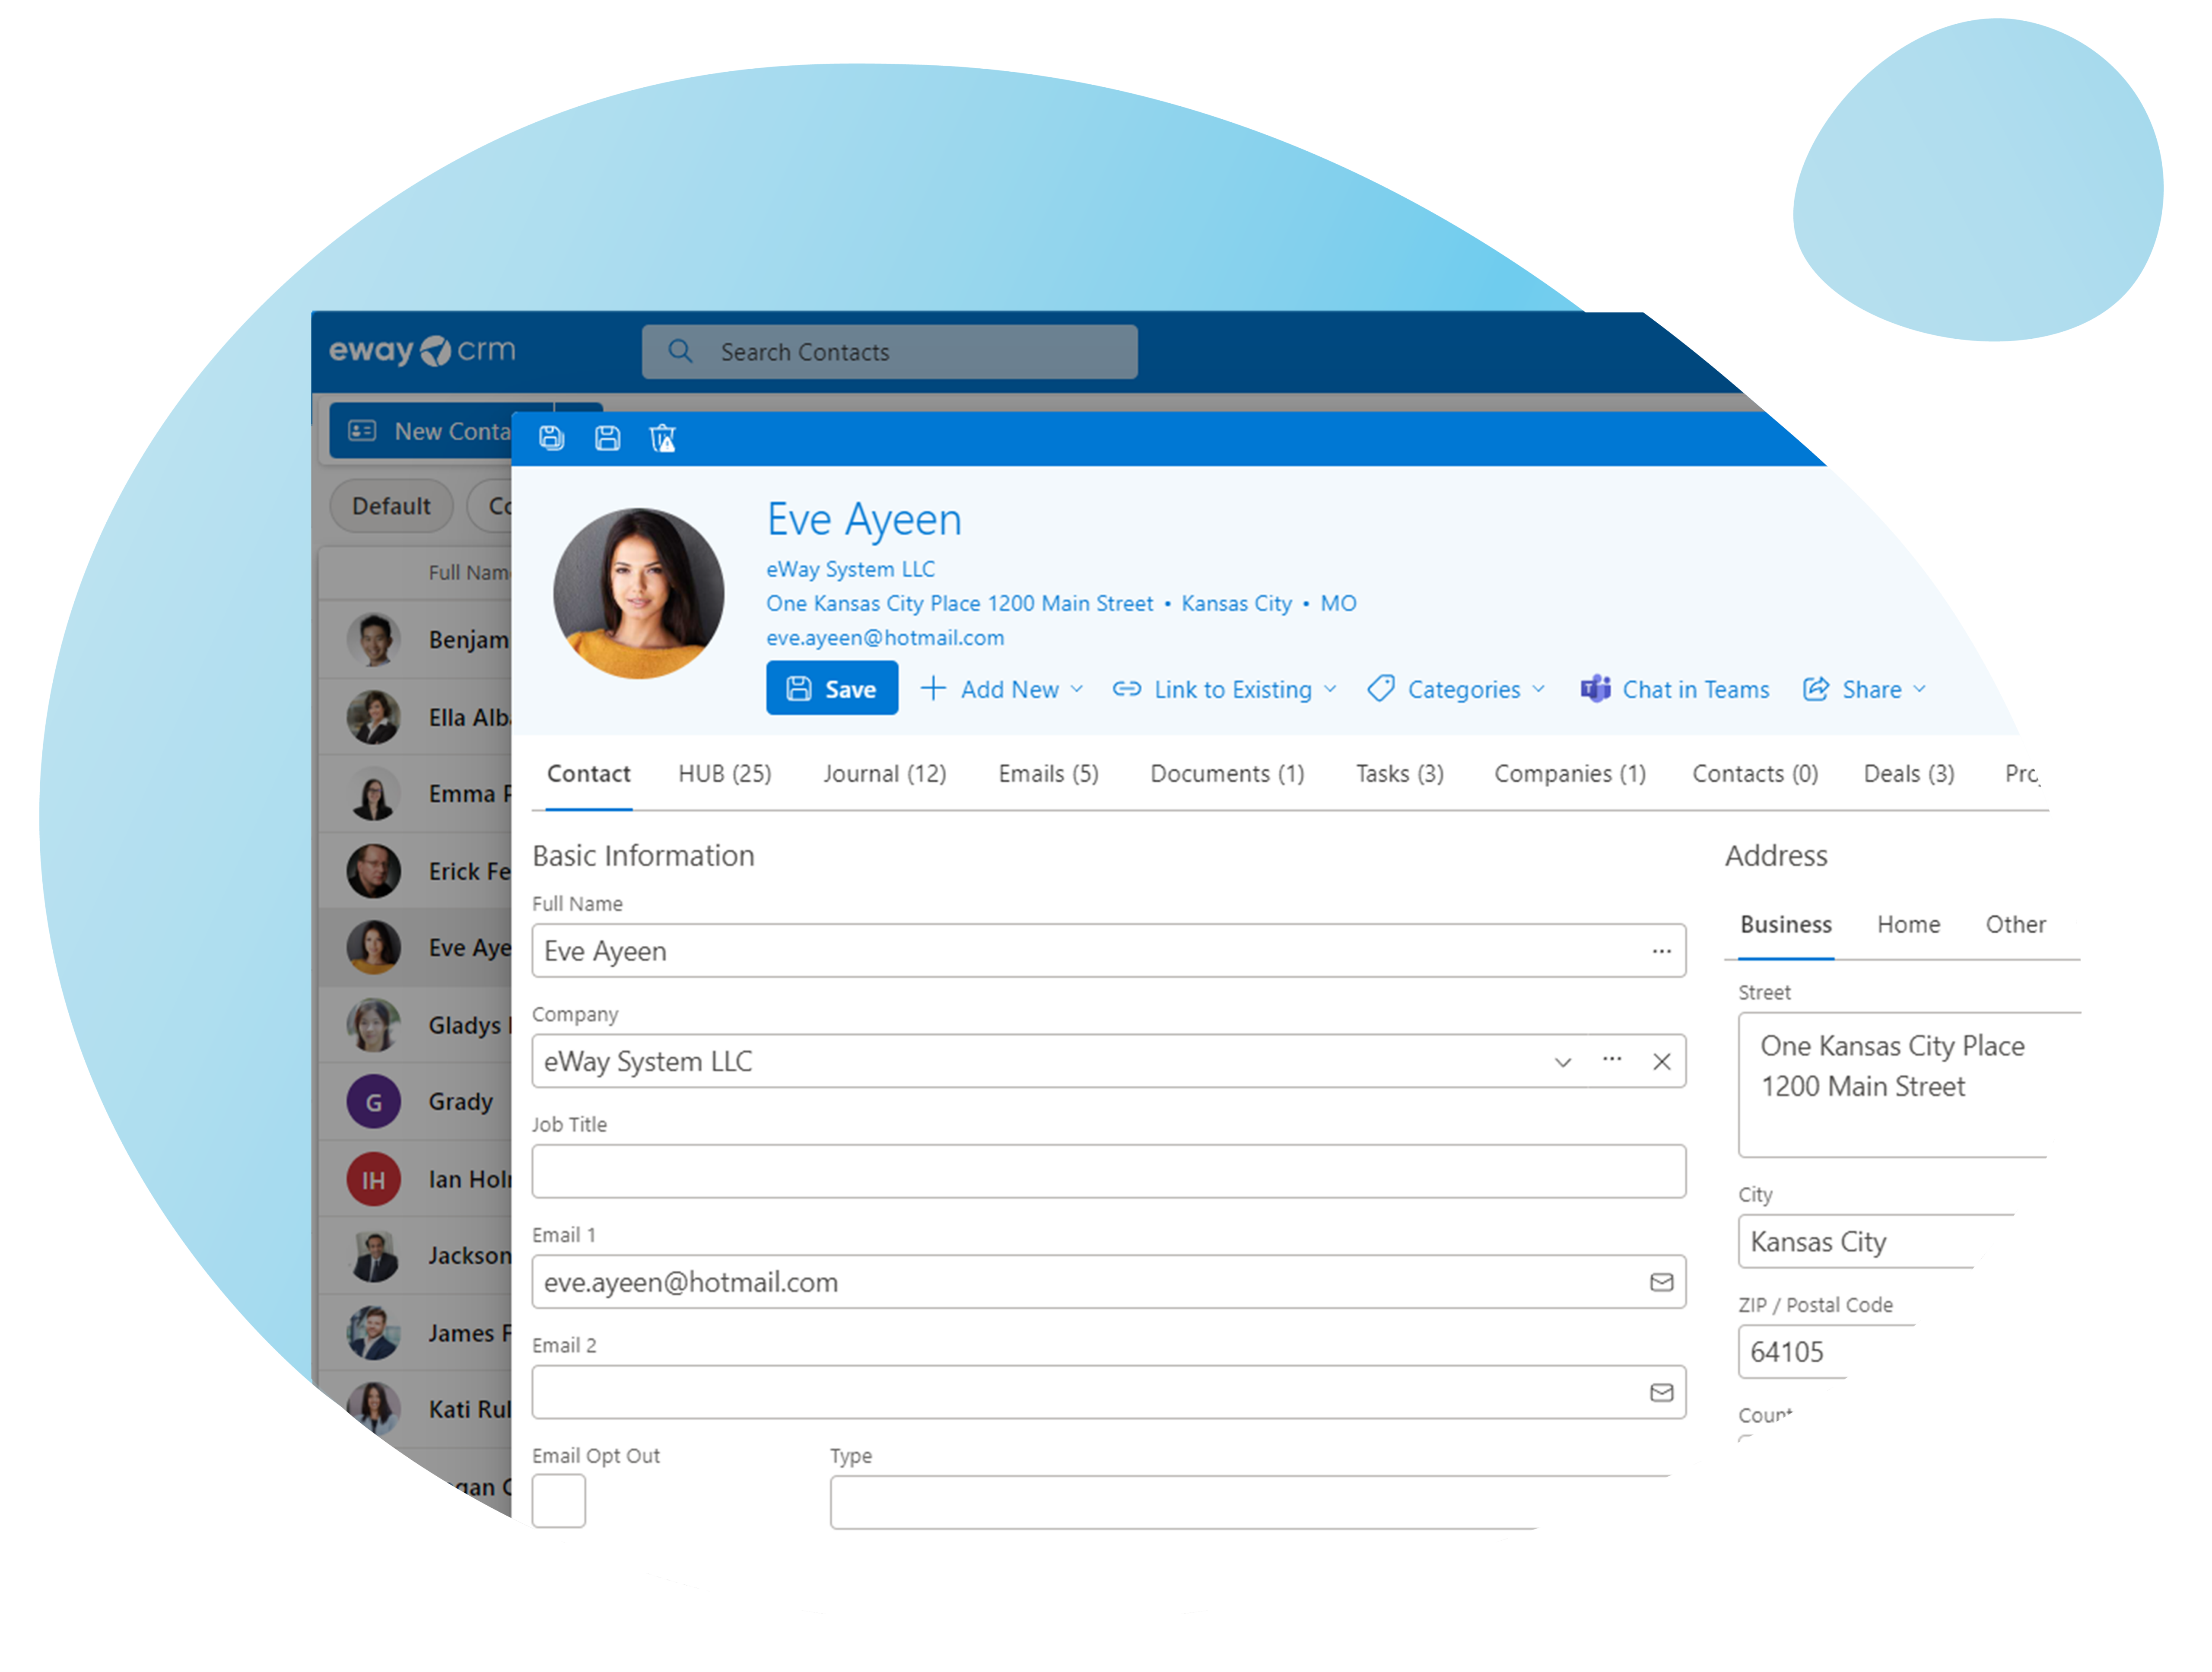 free crm for outlook